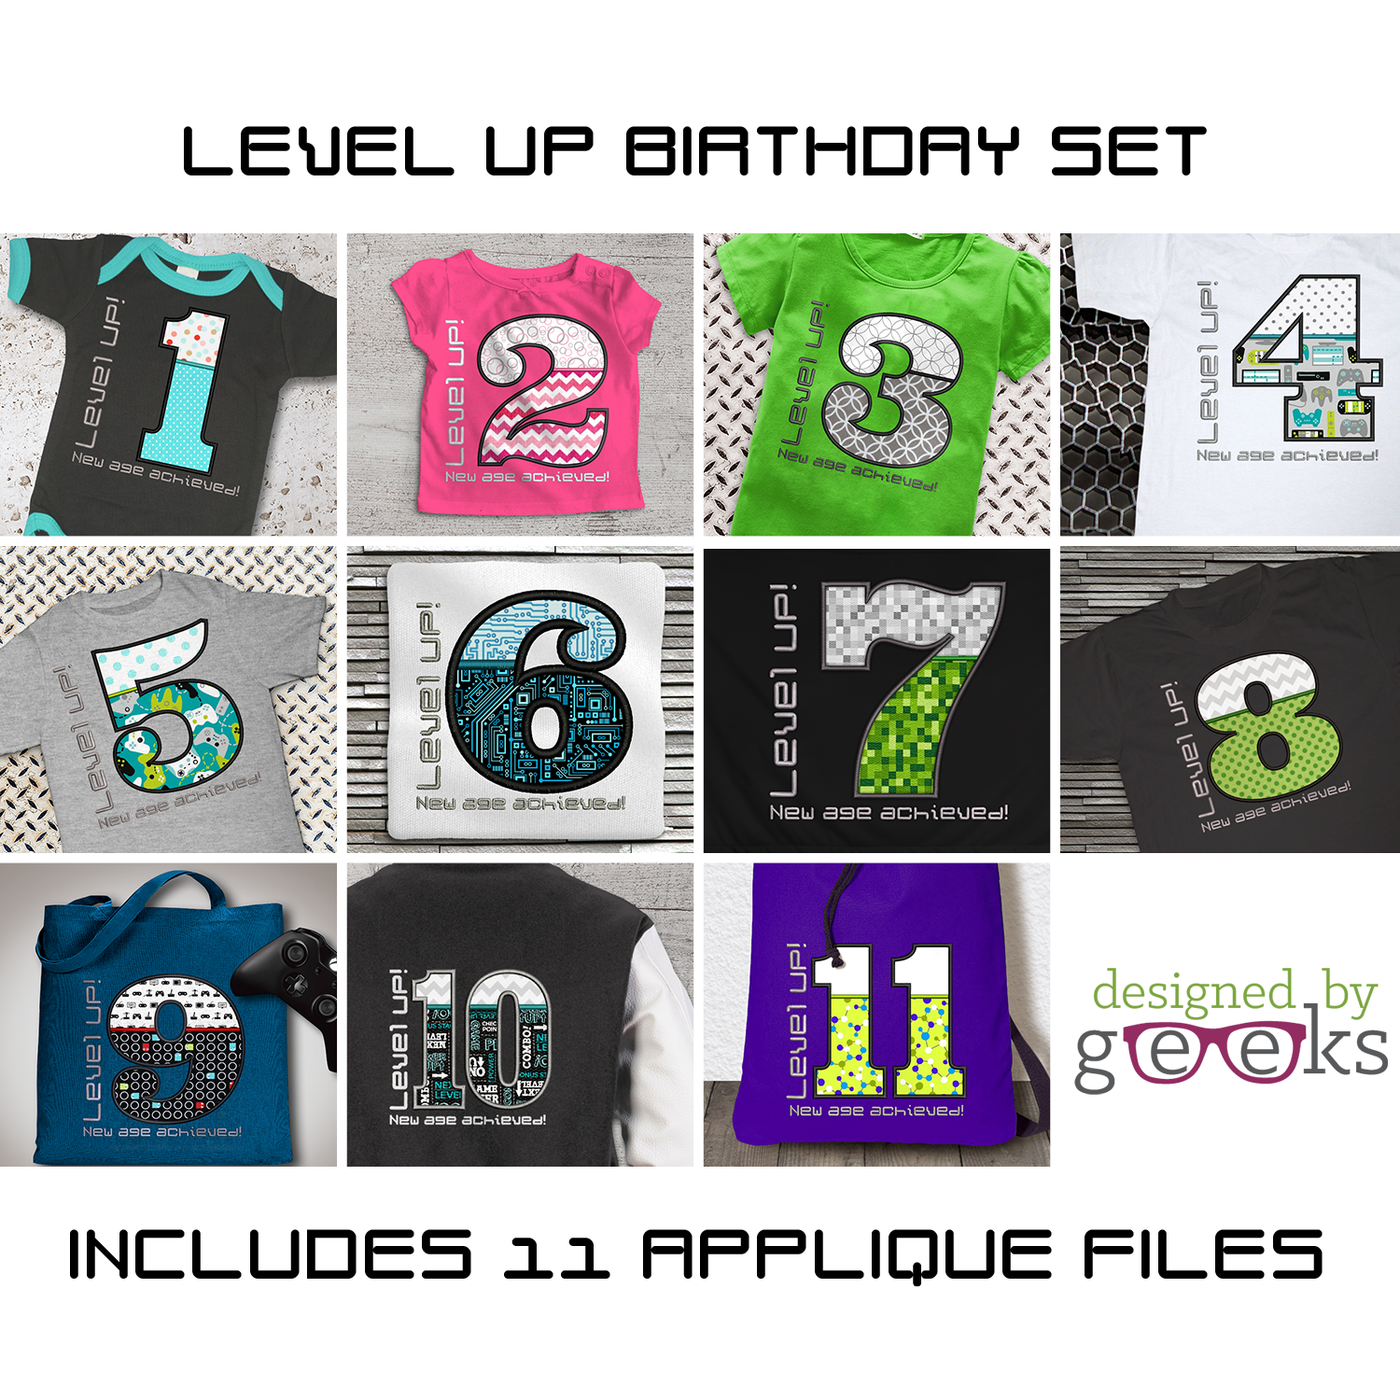 Grid of 11 applique designs in a birthday set. Each has a large applique number (numbers 1 through 11). Around the number is embroidered "Level UP! New age achieved!"